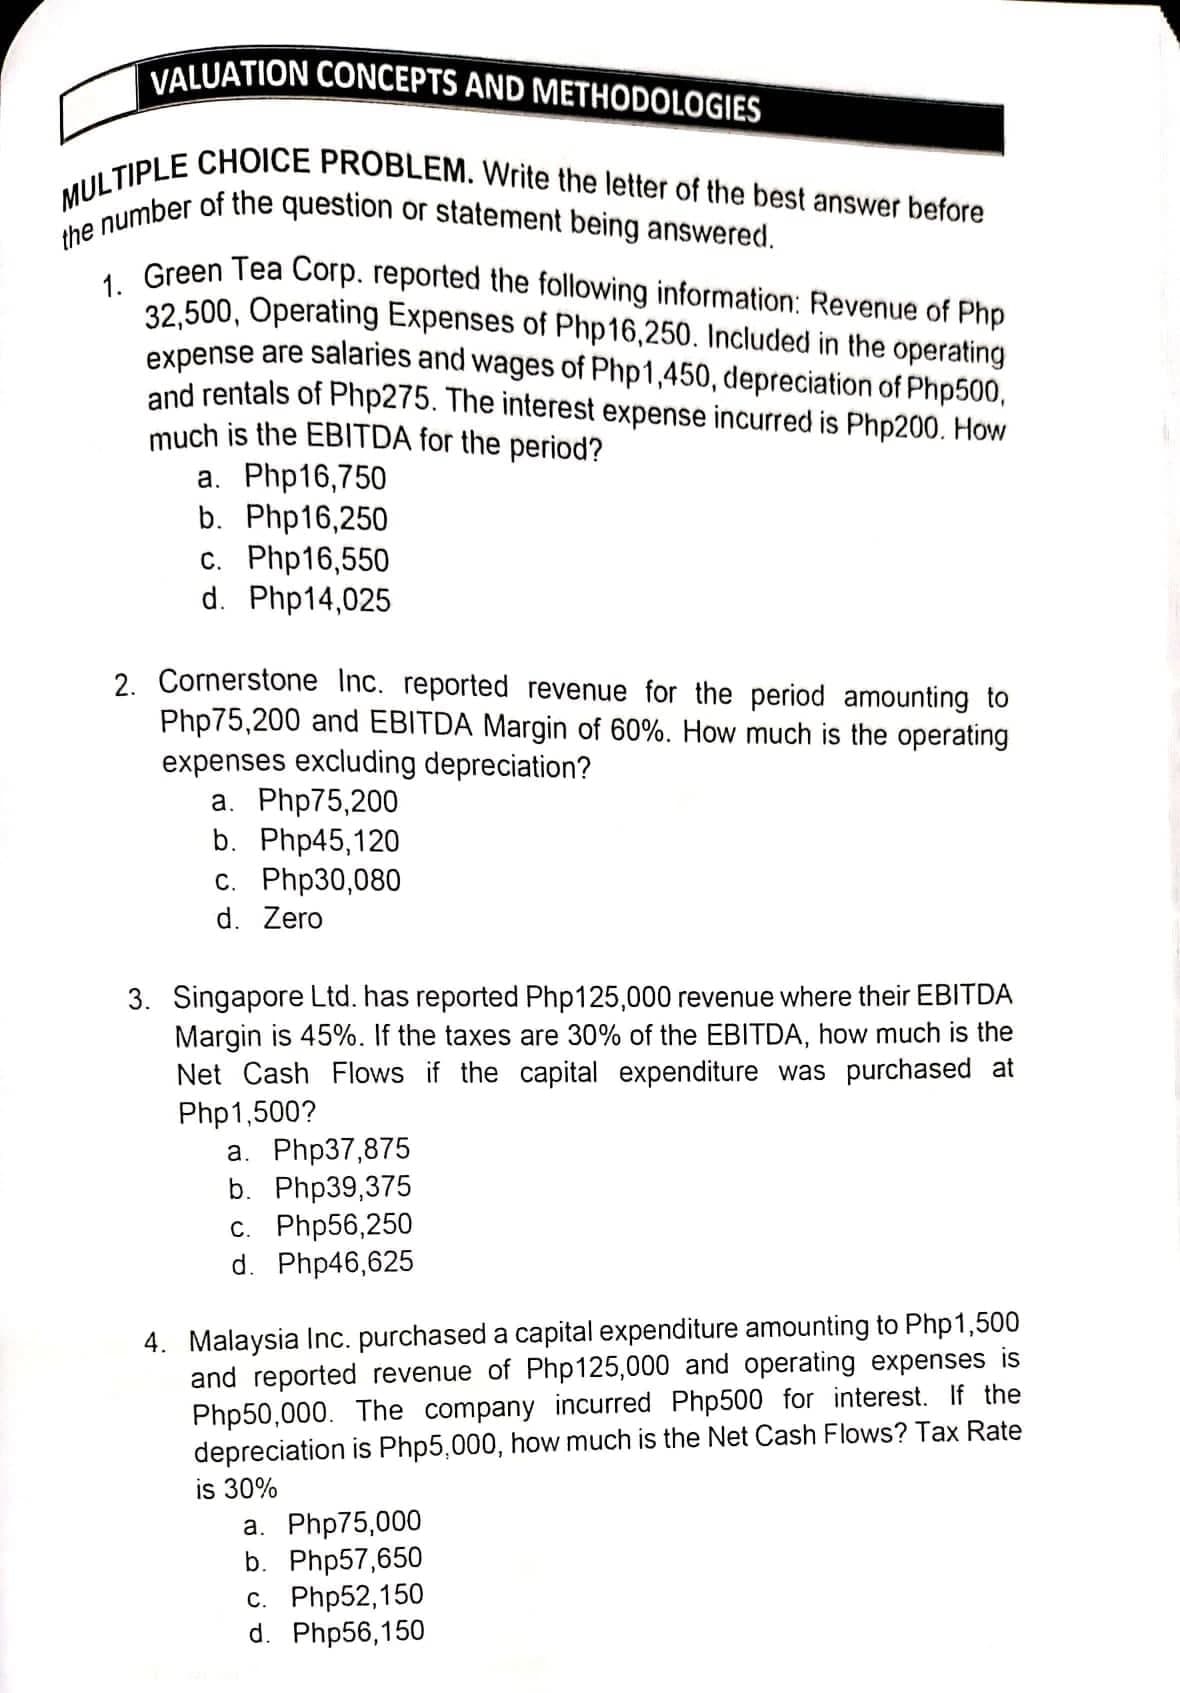 the number of the question or statement being answered.
MULTIPLE CHOICE PROBLEM. Write the letter of the best answer before
VALUATION CONCEPTS AND METHODOLOGIES
, Green Tea Corp. reported the following information: Revenue of Php
32,500, Operating Expenses of Php16,250. Included in the operating
expense are salaries and wages of Php1,450, depreciation of Php500,
and rentals of Php275. The interest expense incurred is Php200. How
much is the EBITDA for the period?
а. Php16,750
b. Php16,250
c. Php16,550
d. Php14,025
2. Cornerstone Inc. reported revenue for the period amounting to
Php75,200 and EBITDA Margin of 60%. How much is the operating
expenses excluding depreciation?
a. Php75,200
b. Php45,120
с. Php30,080
d. Zero
3. Singapore Ltd. has reported Php125,000 revenue where their EBITDA
Margin is 45%. If the taxes are 30% of the EBITDA, how much is the
Net Cash Flows if the capital expenditure was purchased at
Php1,500?
а. Php37,875
b. Php39,375
с. Php56,250
d. Php46,625
4. Malaysia Inc. purchased a capital expenditure amounting to Php1,500
and reported revenue of Php125,000 and operating expenses is
Php50,000. The company incurred Php500 for interest. If the
depreciation is Php5,000, how much is the Net Cash Flows? Tax Rate
is 30%
a. Php75,000
b. Php57,650
с. Php52,150
d. Php56,150
